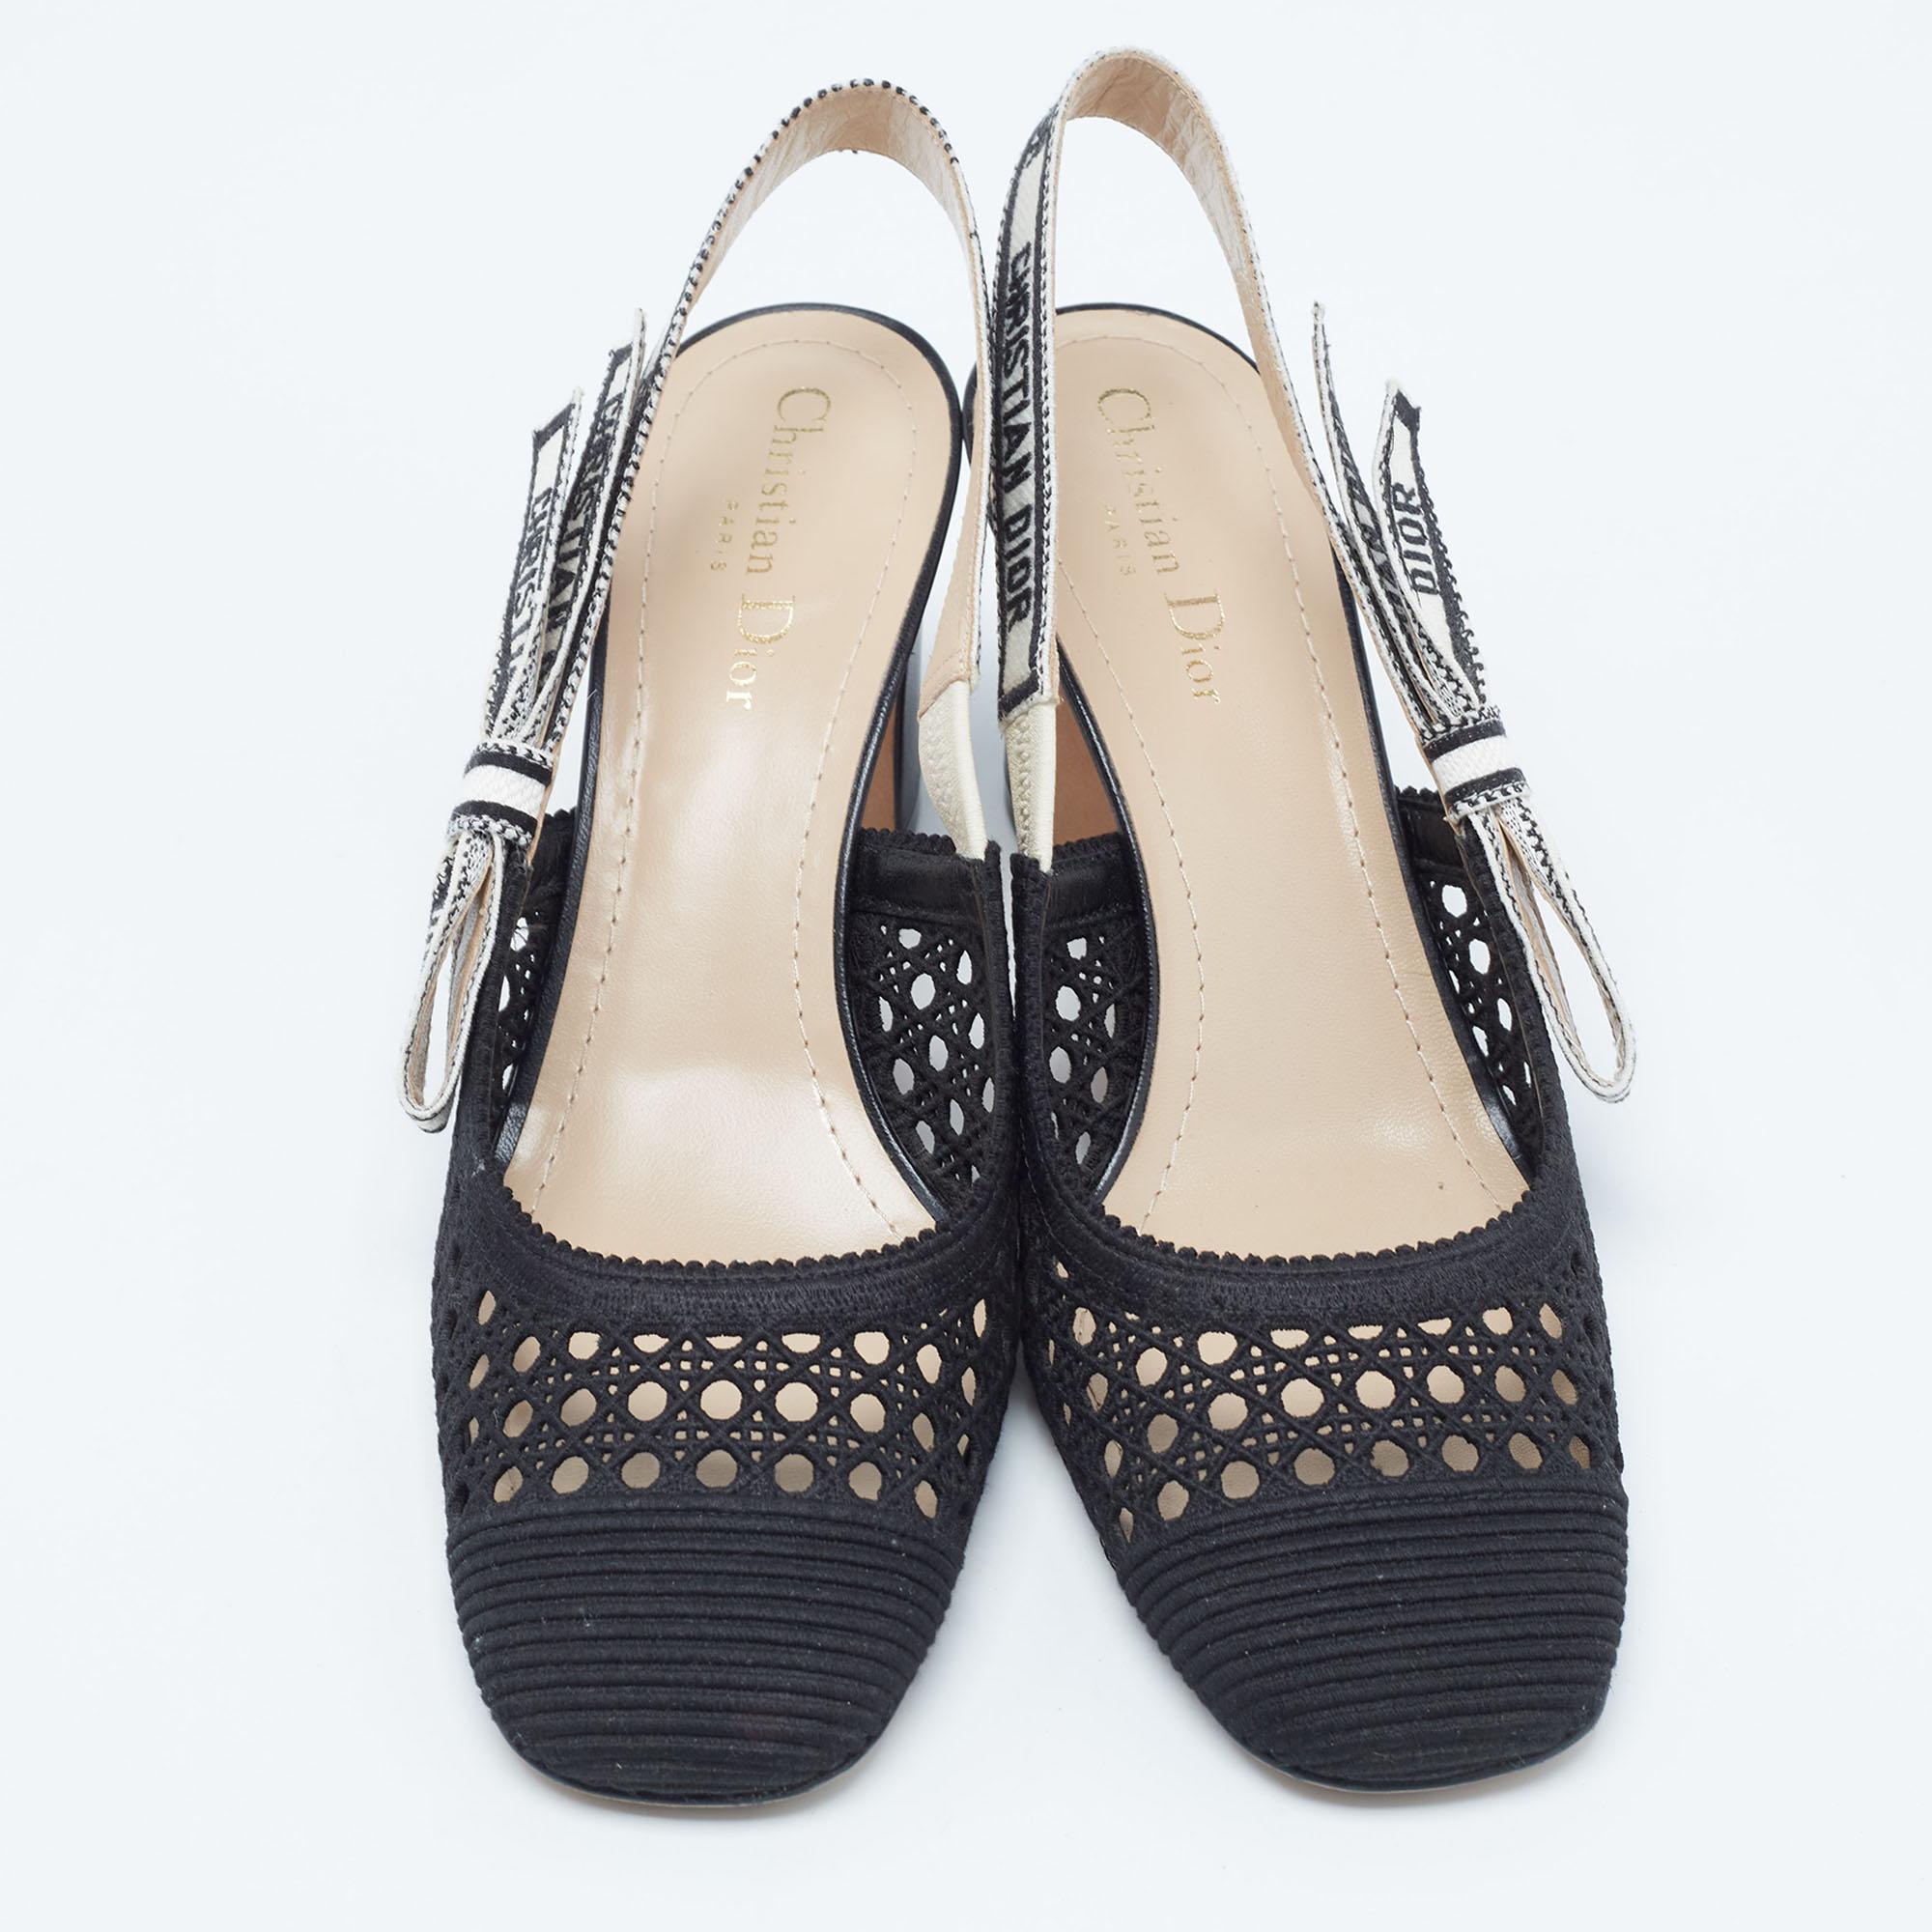 Make a chic style statement with these designer pumps. They showcase sturdy heels and durable soles, perfect for your fashionable outings!

Includes: Original Box, Info Card